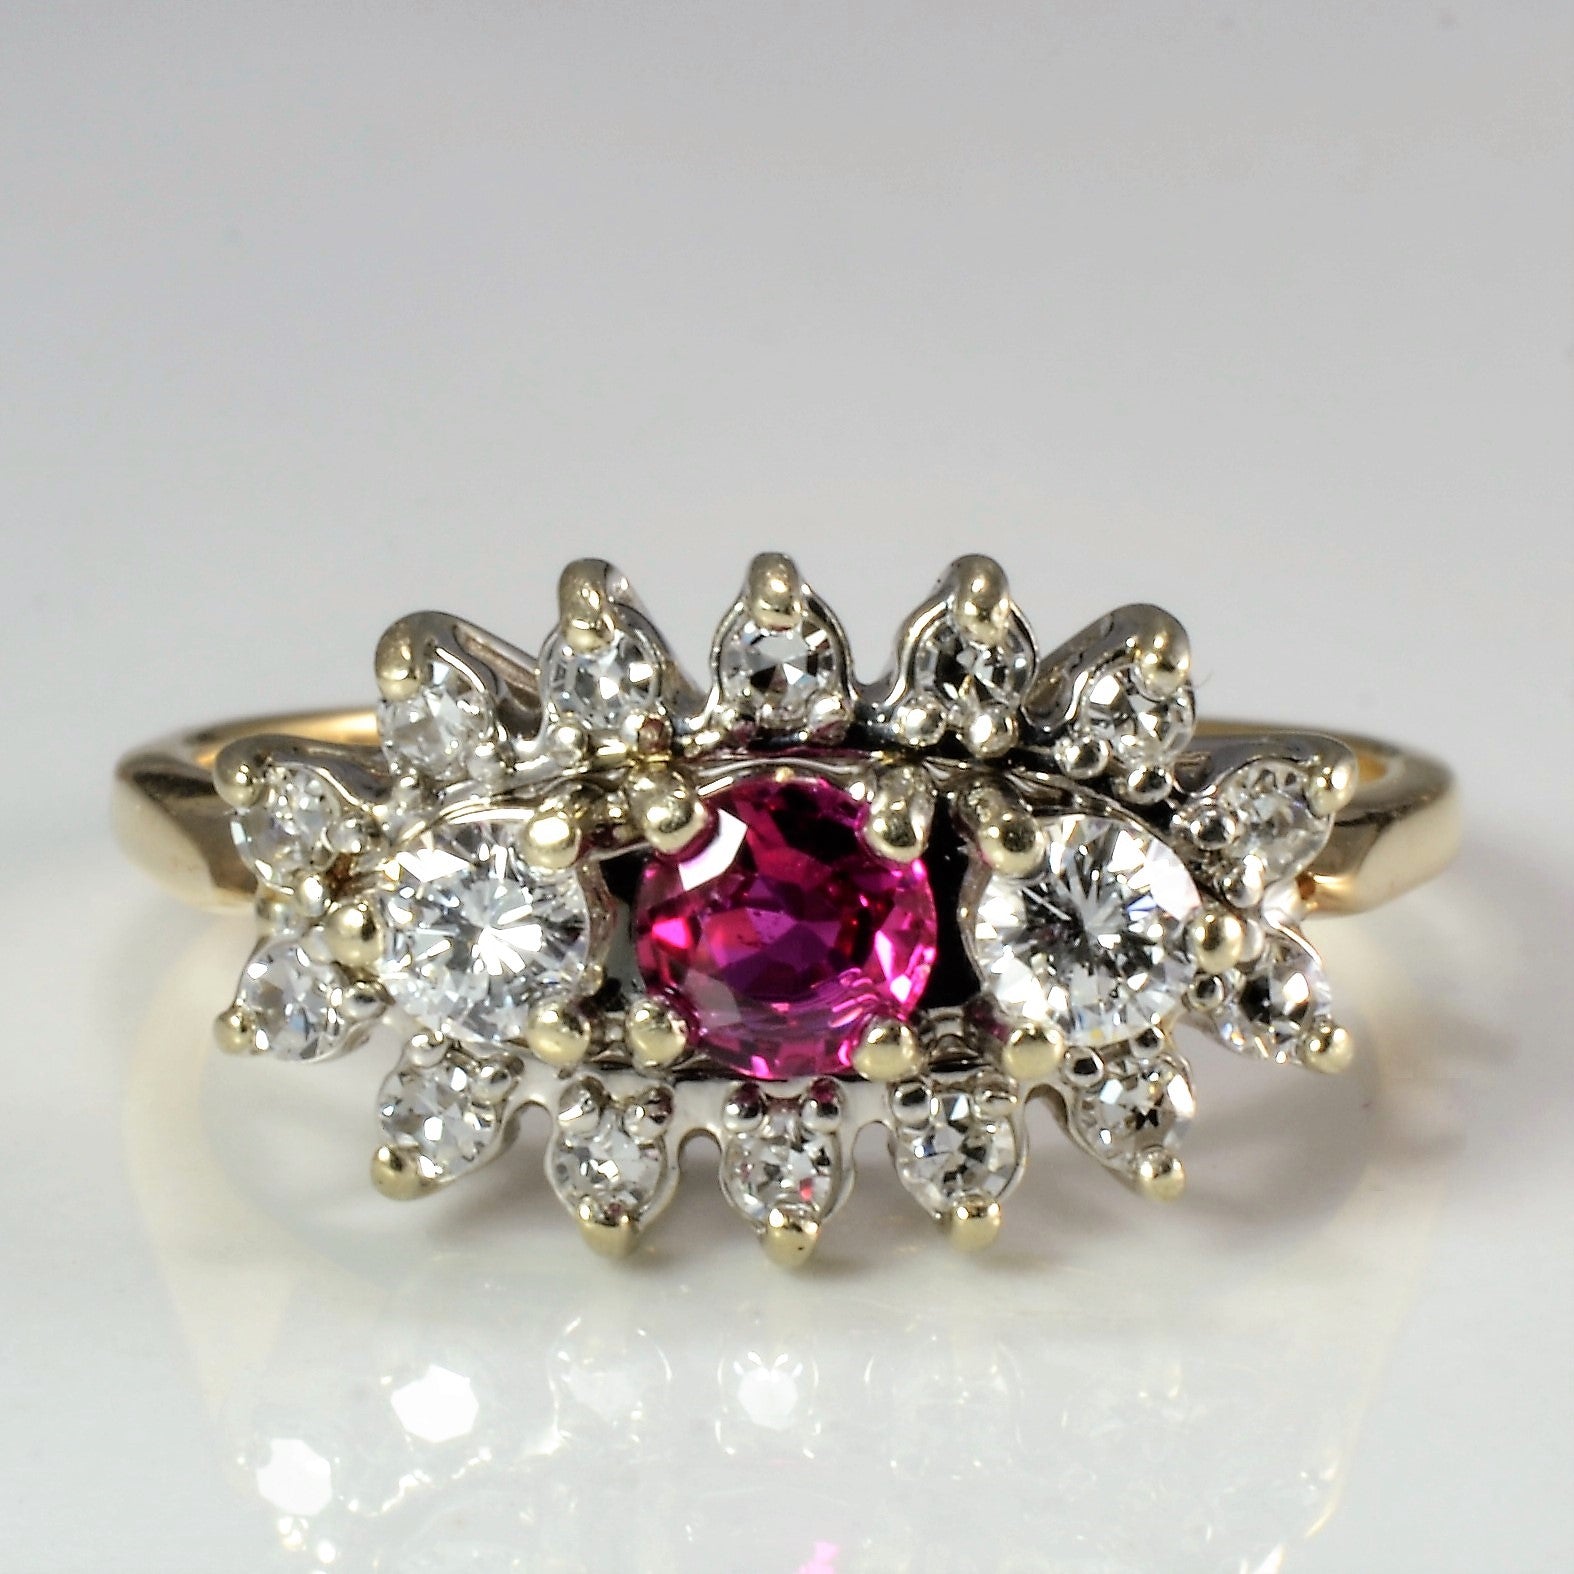 Diamond & Ruby Cluster Engagement Ring | 0.28 ctw, SZ 5 |